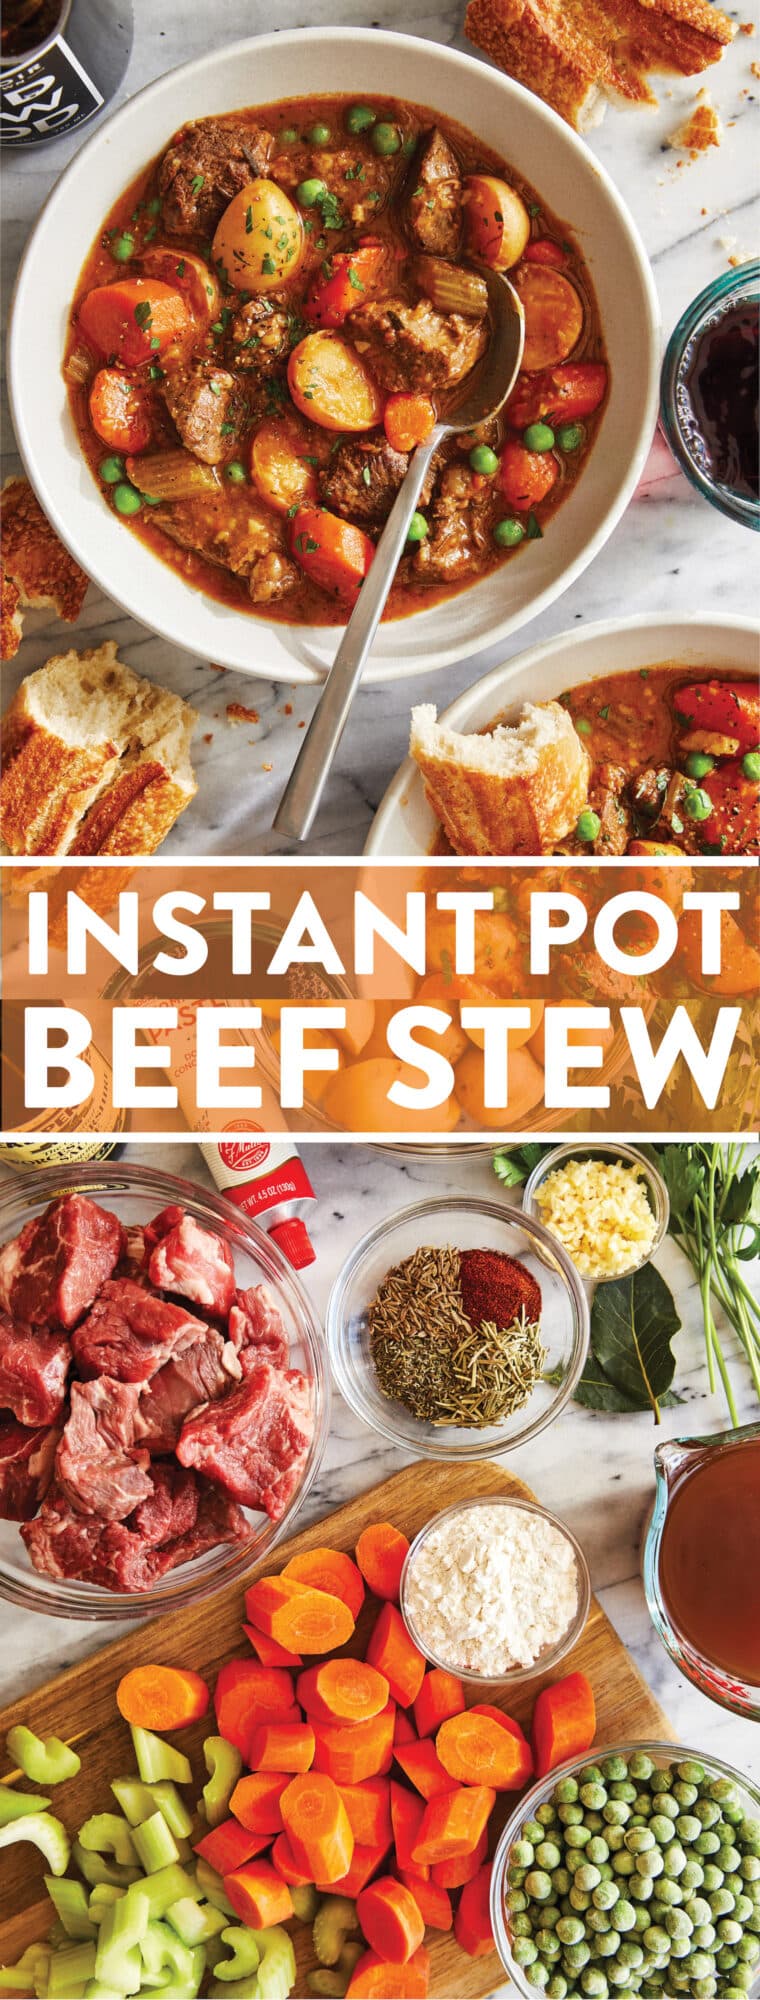 Best Ever Instant Pot Beef Stew - The Salty Marshmallow